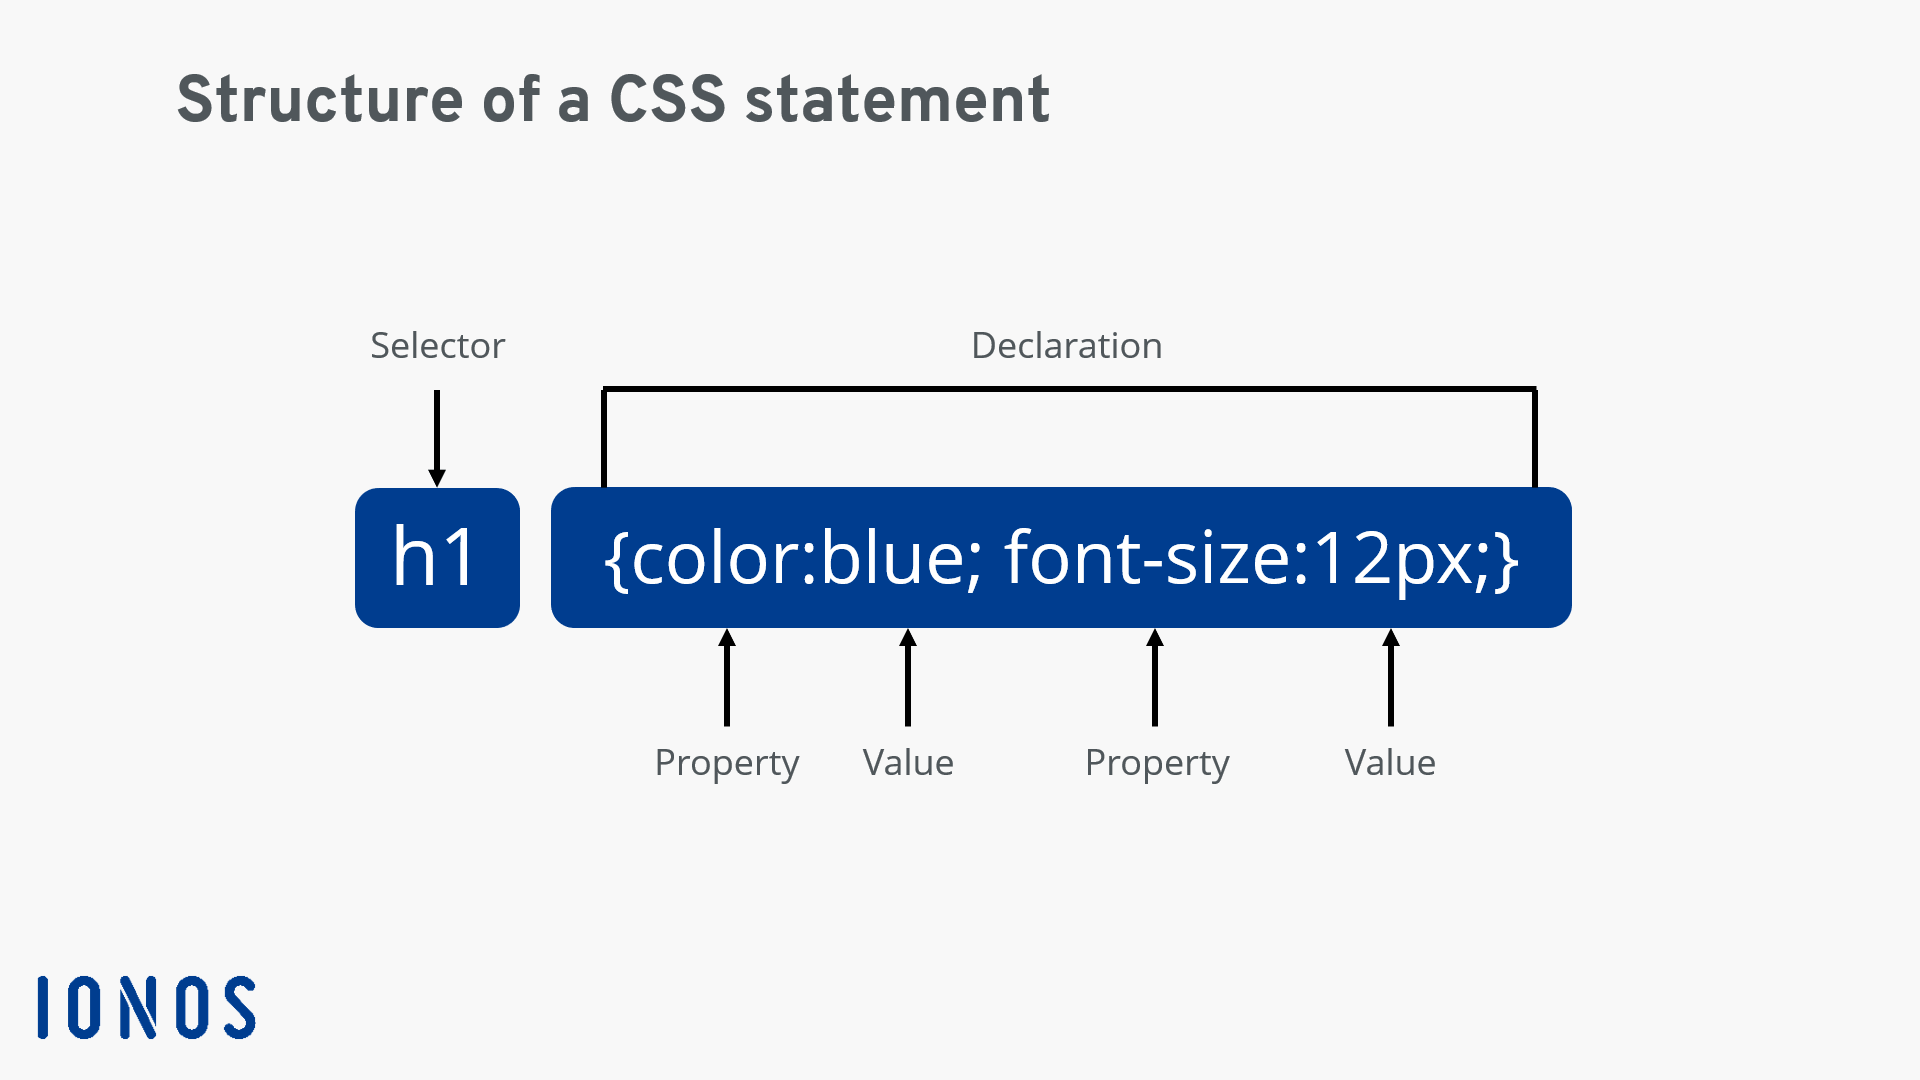 CSS statement: Representation of basic structure